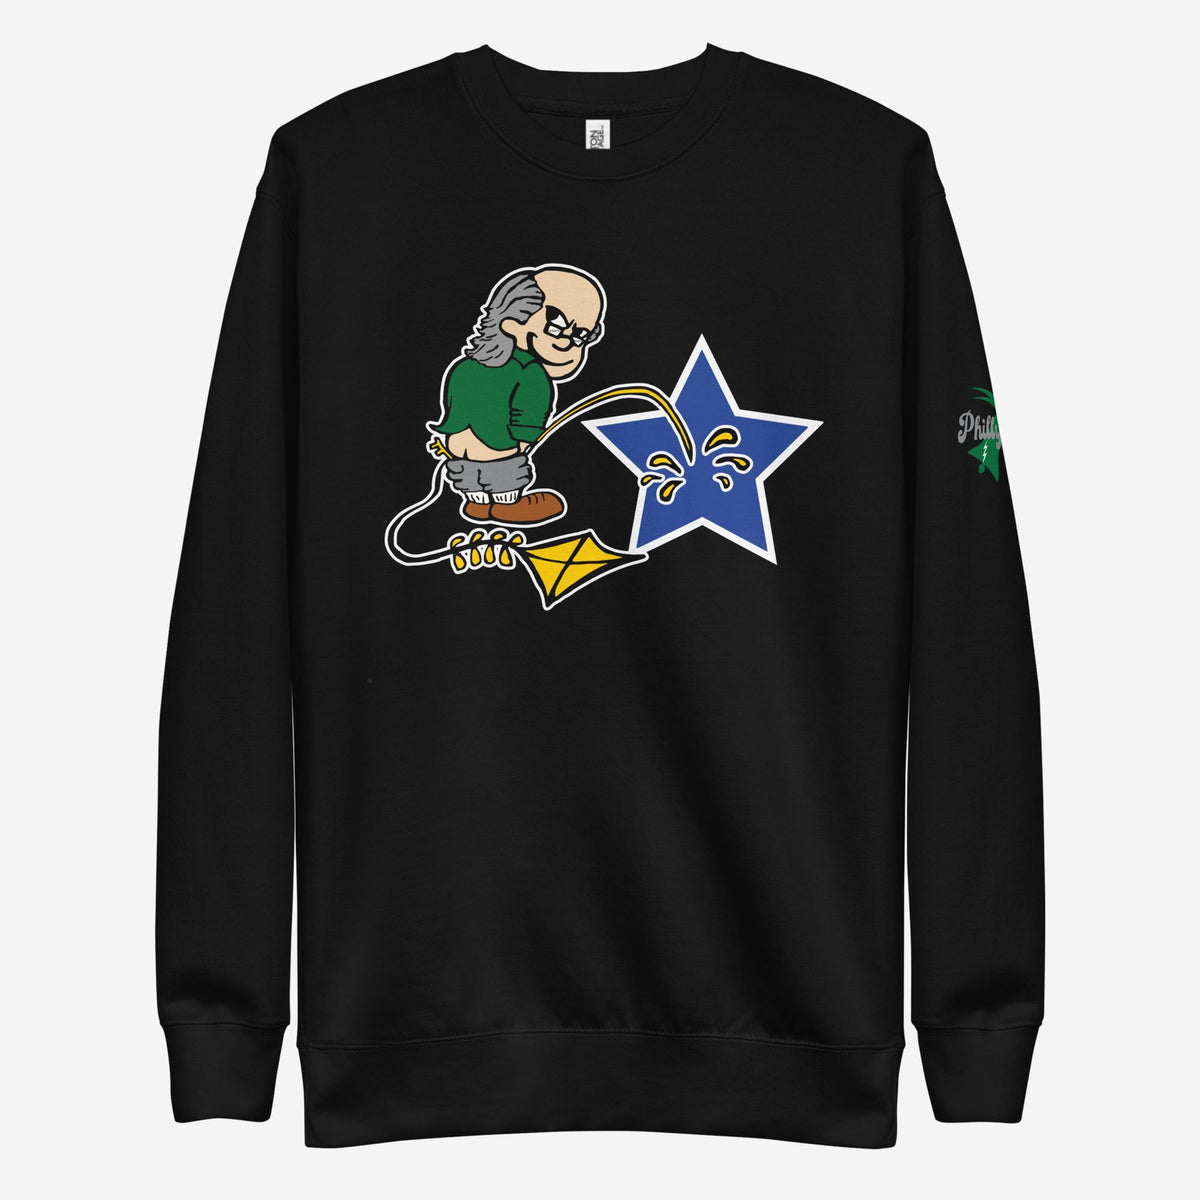 &quot;Ben Franklin Whizzing on the Cowboy Star&quot; Sweatshirt